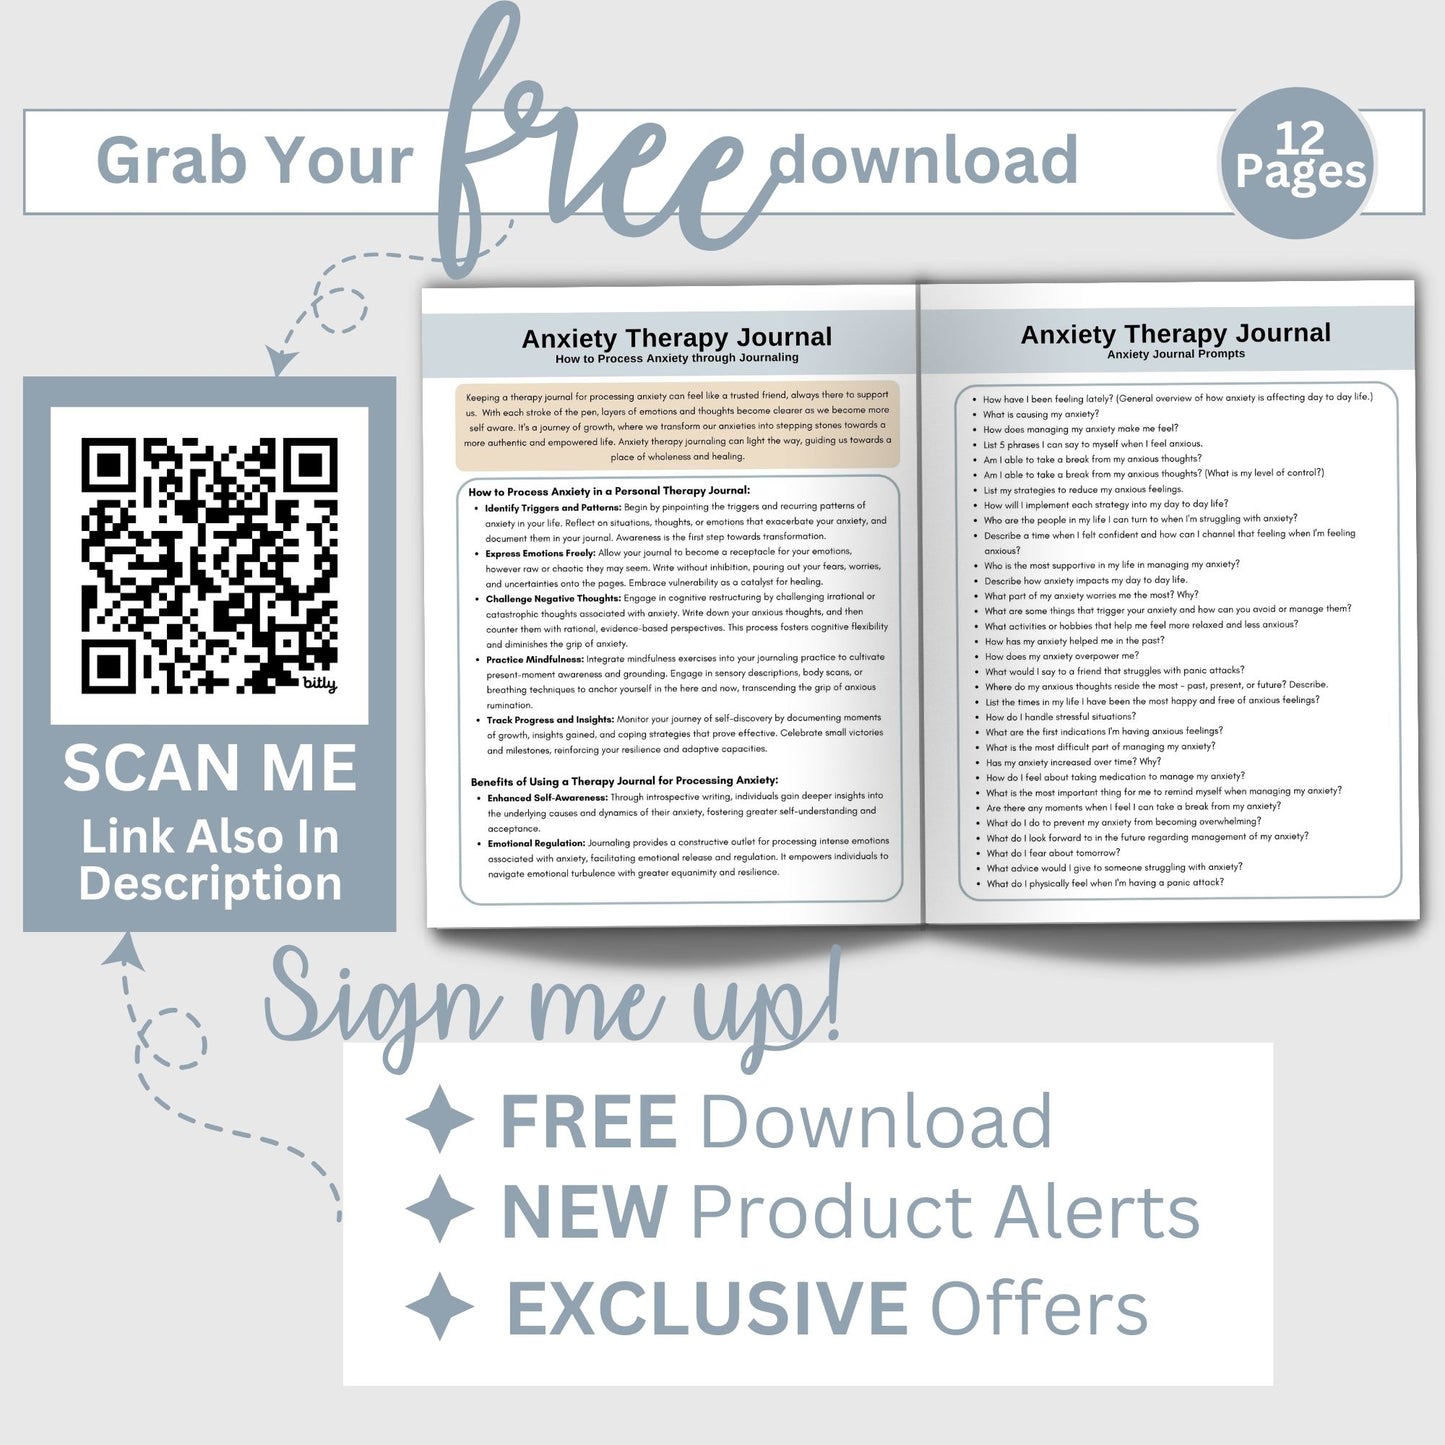 SOAP Note Guide Examples & Prompts, 50 pages of SOAP Note Cheat Sheets